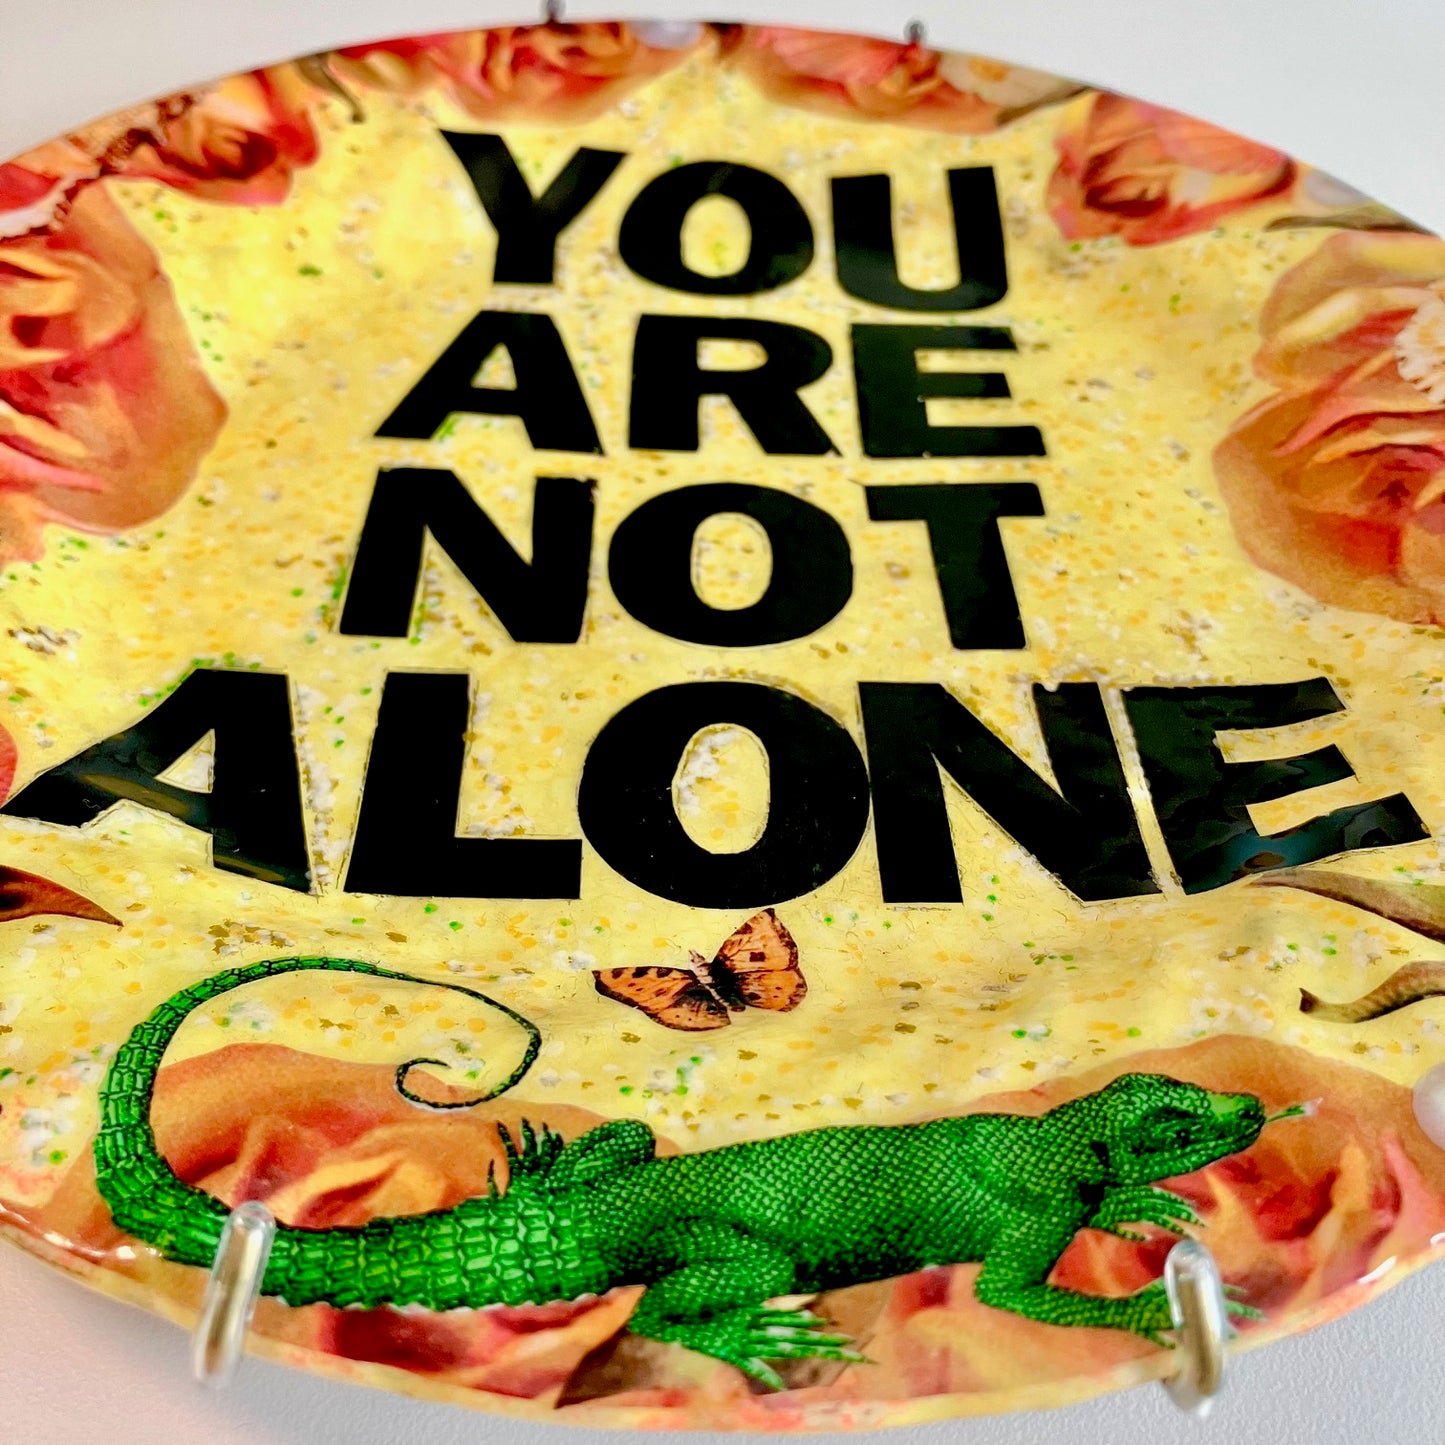 "You Are Not Alone" one-of-a-kind collage artwork Wall Plate by House of Frisson. Featuring the words "You Are Not Alone" framed by roses, pearls, and moths, on a yellow background. Closeup detail.